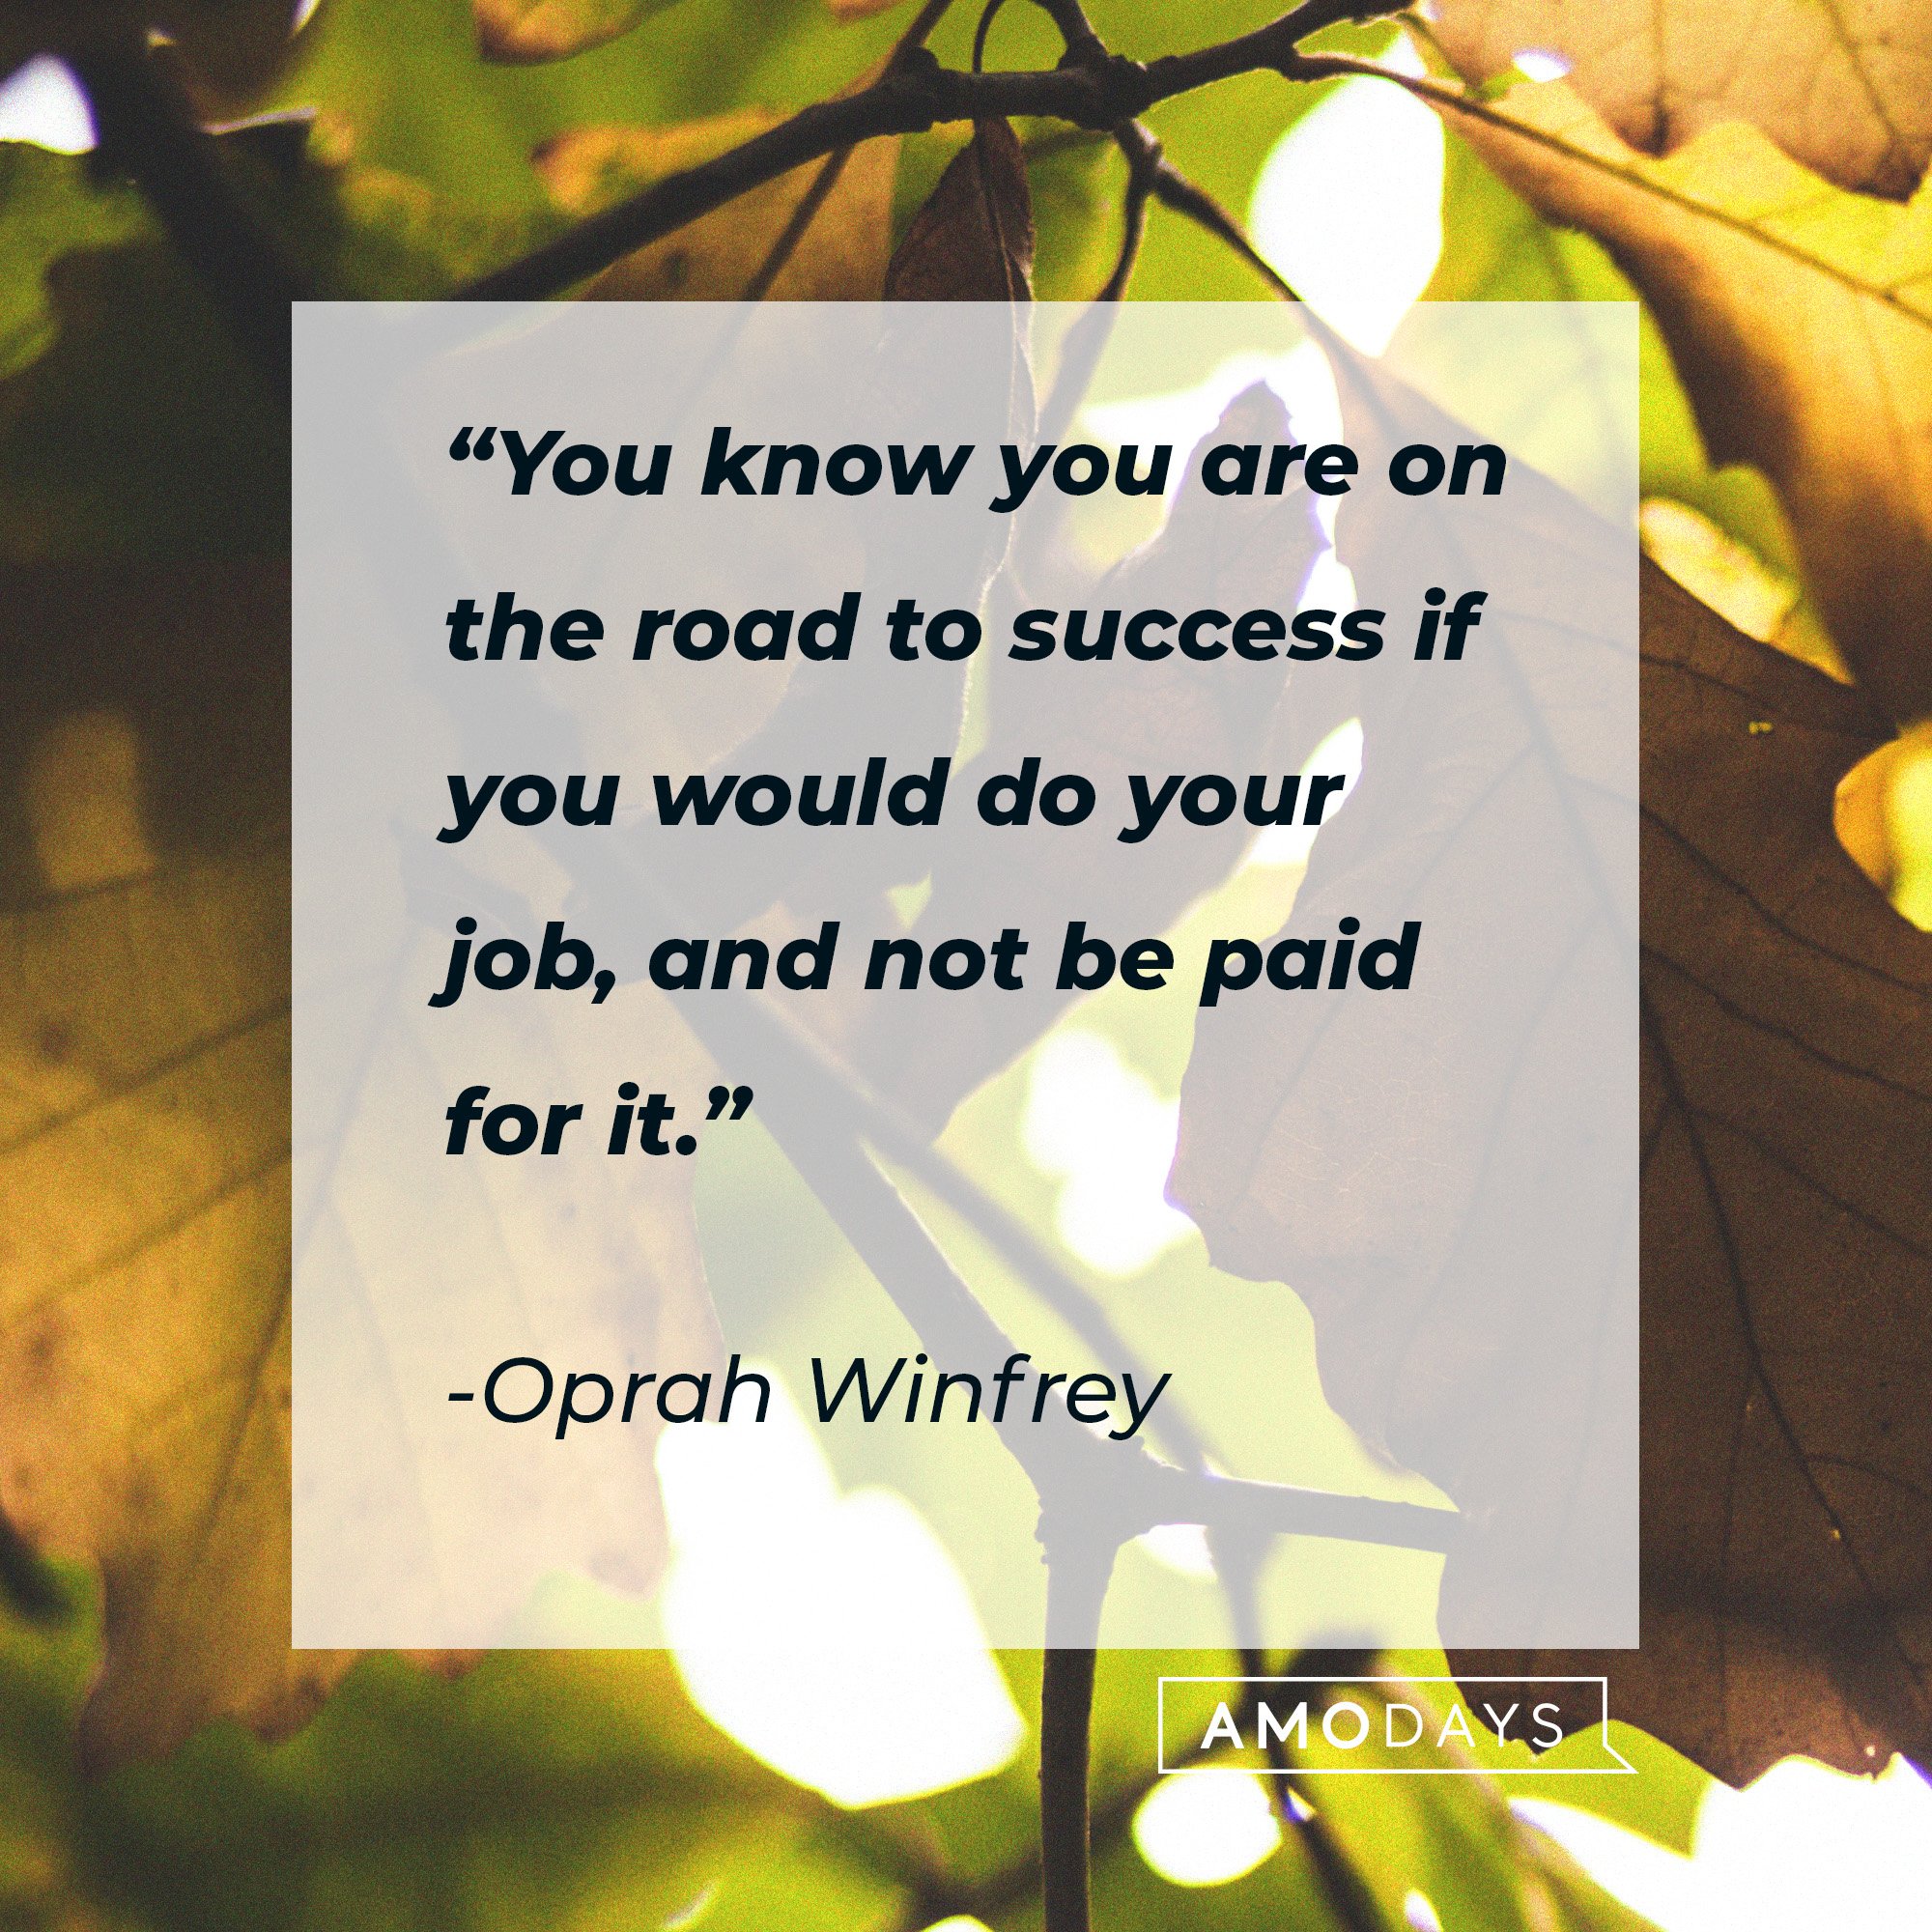 Oprah Winfrey's quote: “You know you are on the road to success if you would do your job, and not be paid for it.” | Image: AmoDays